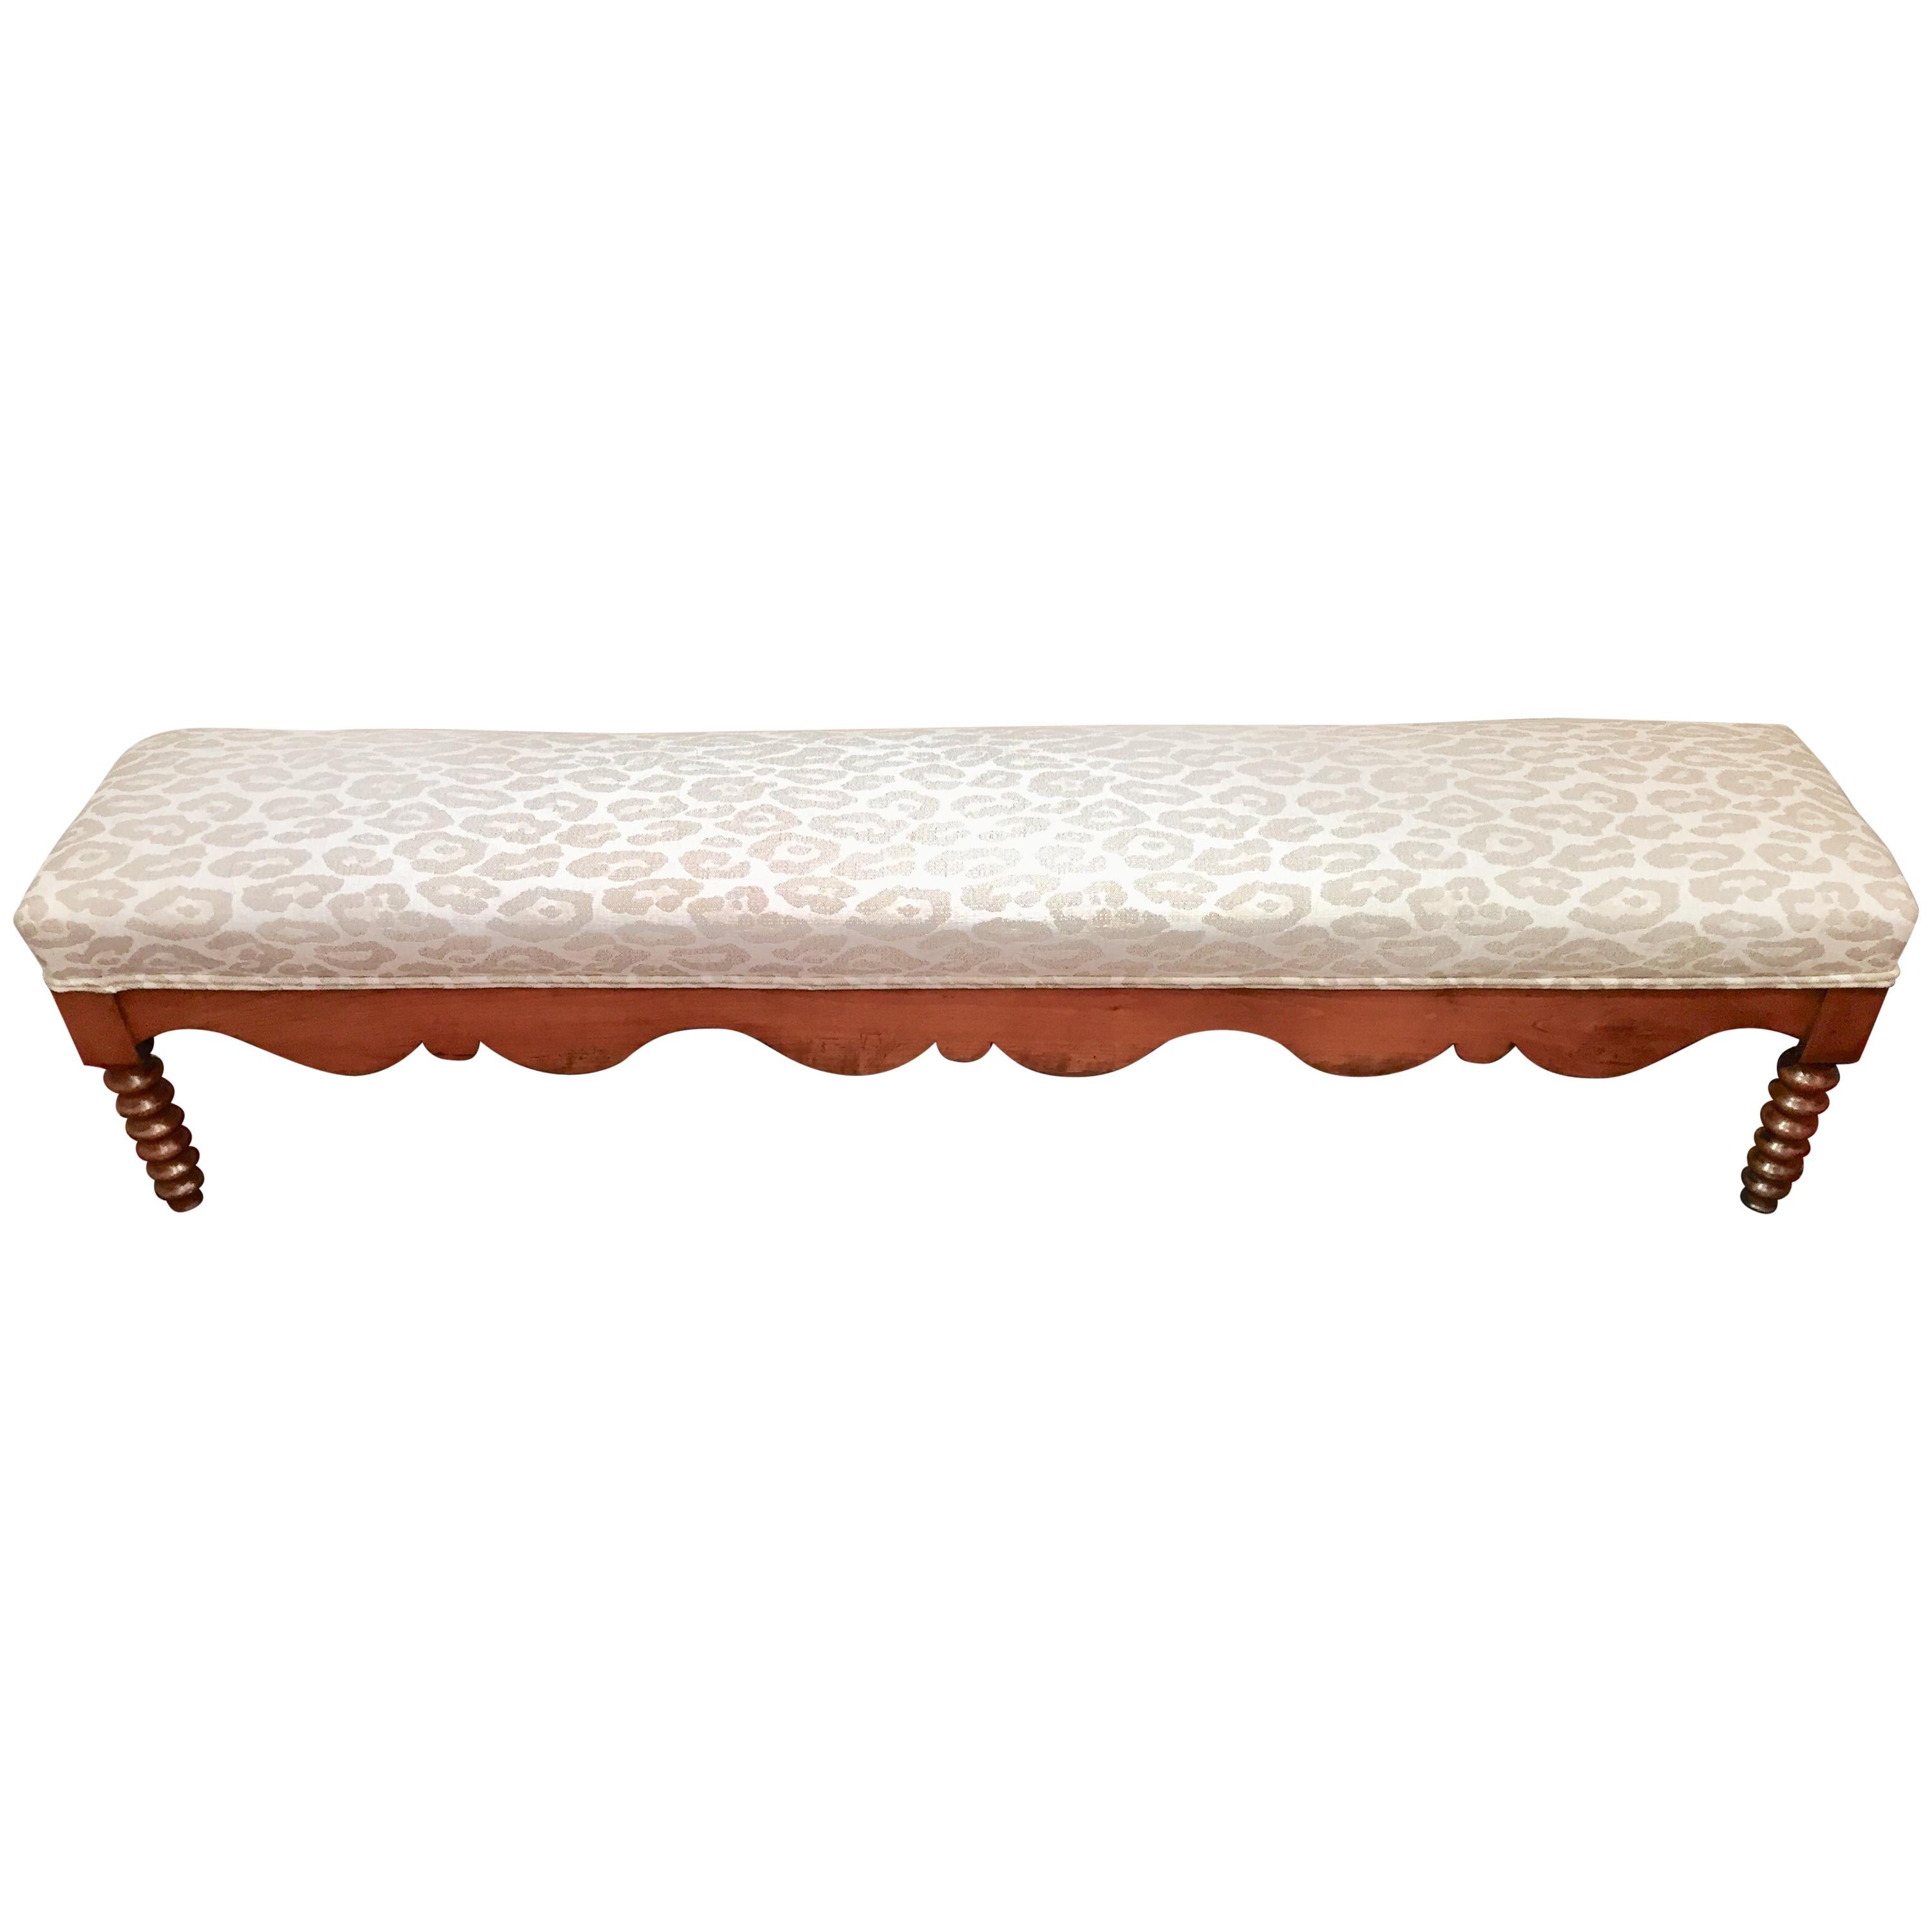 Delightful 6 Foot Long Antique Scalloped Wood Bench with Animal Print Upholstery